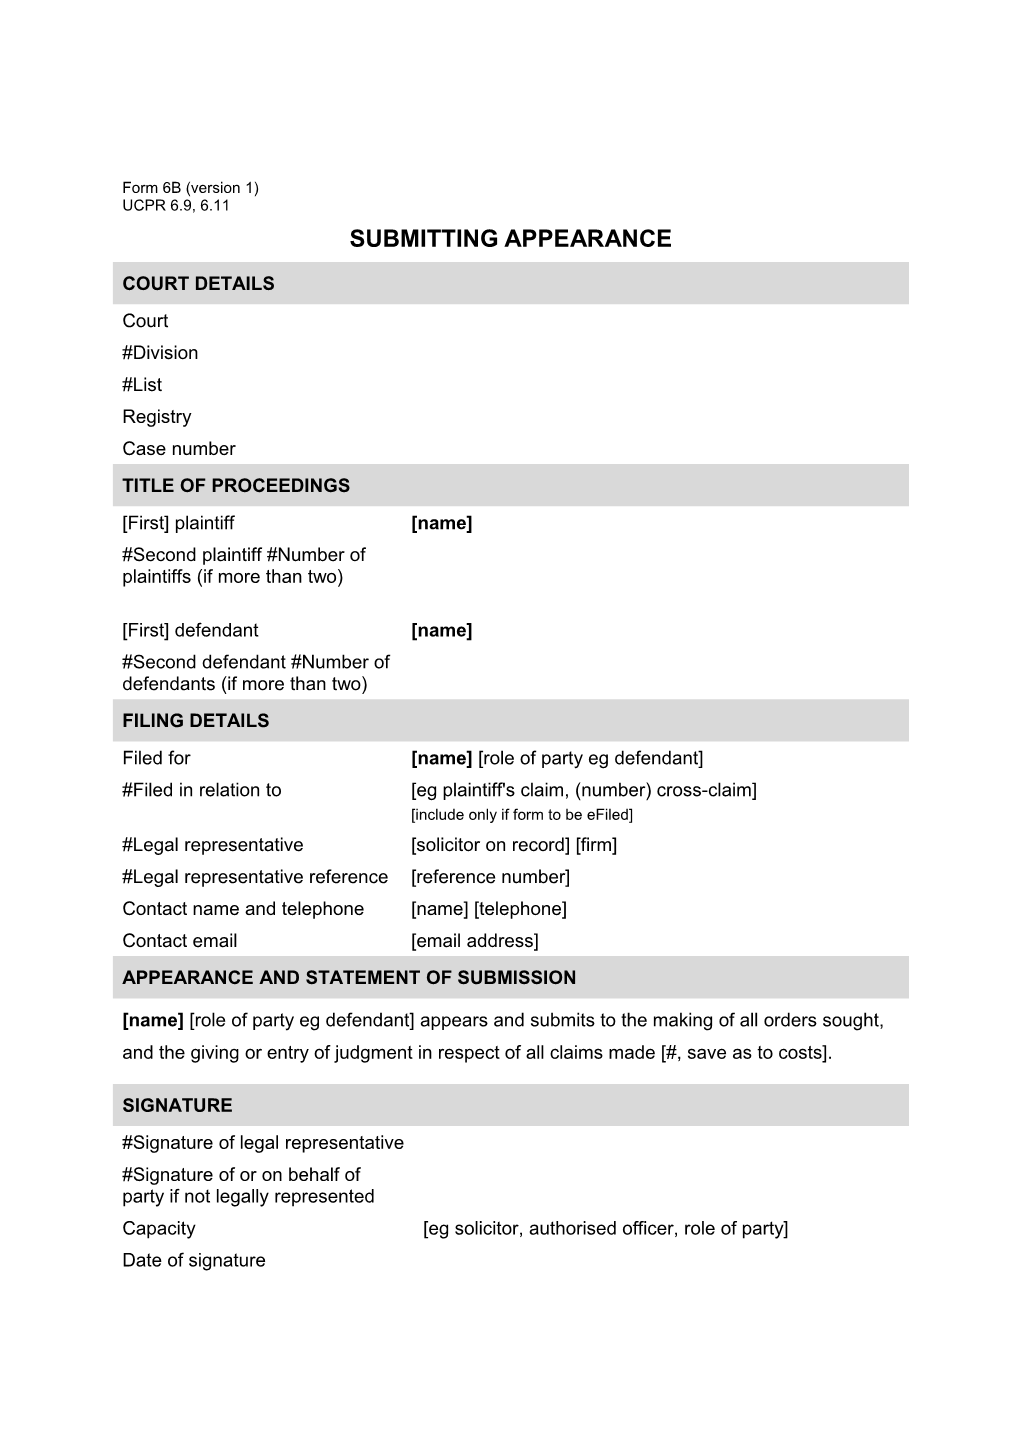 NSW UCPR Form 6 - Appearance - Amended Note About Submitting Appearance